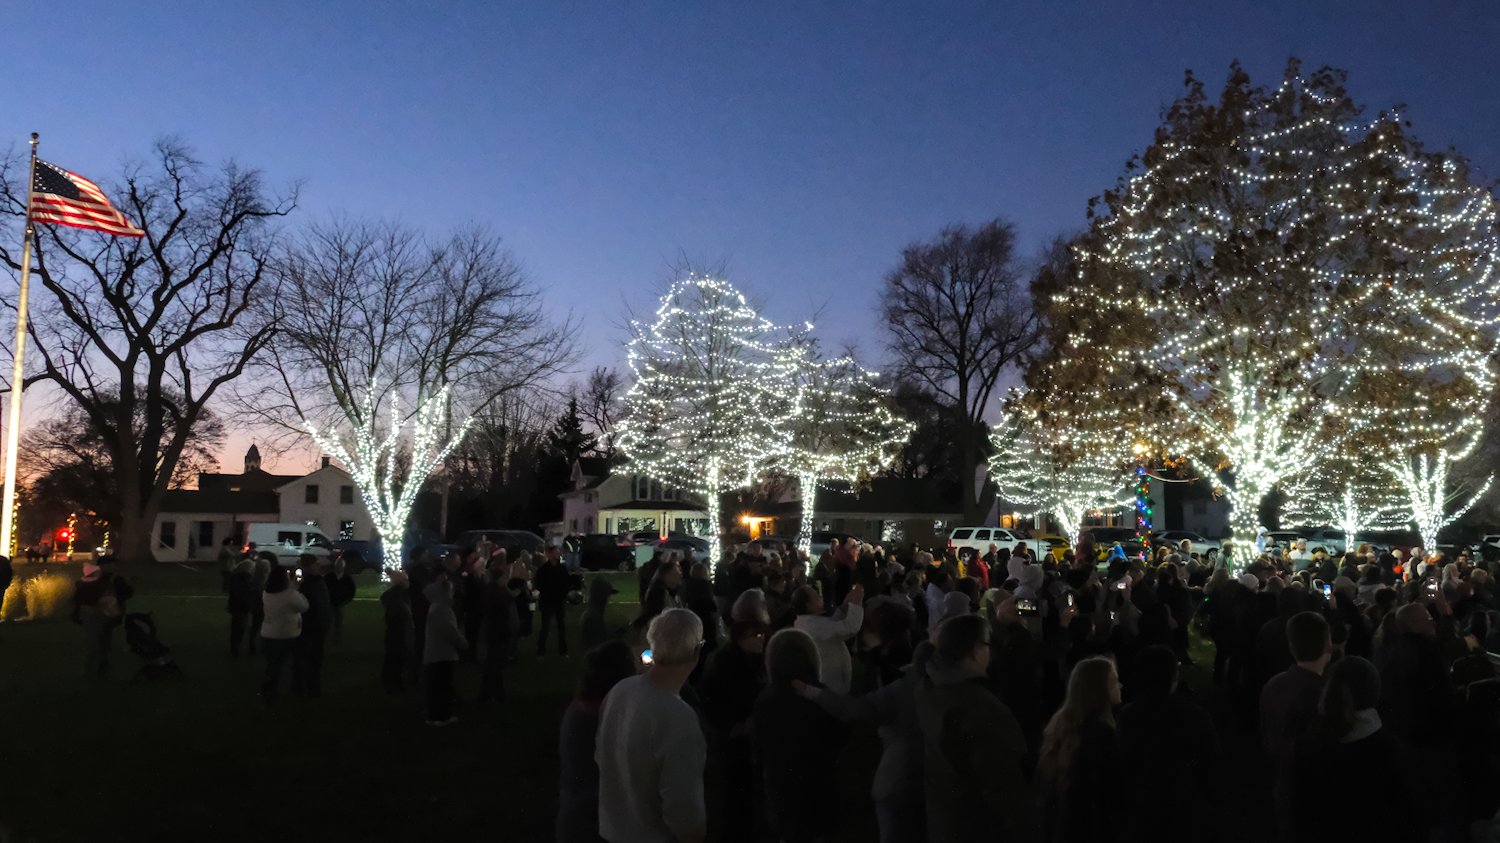 Lights turned on for the other trees in the park.